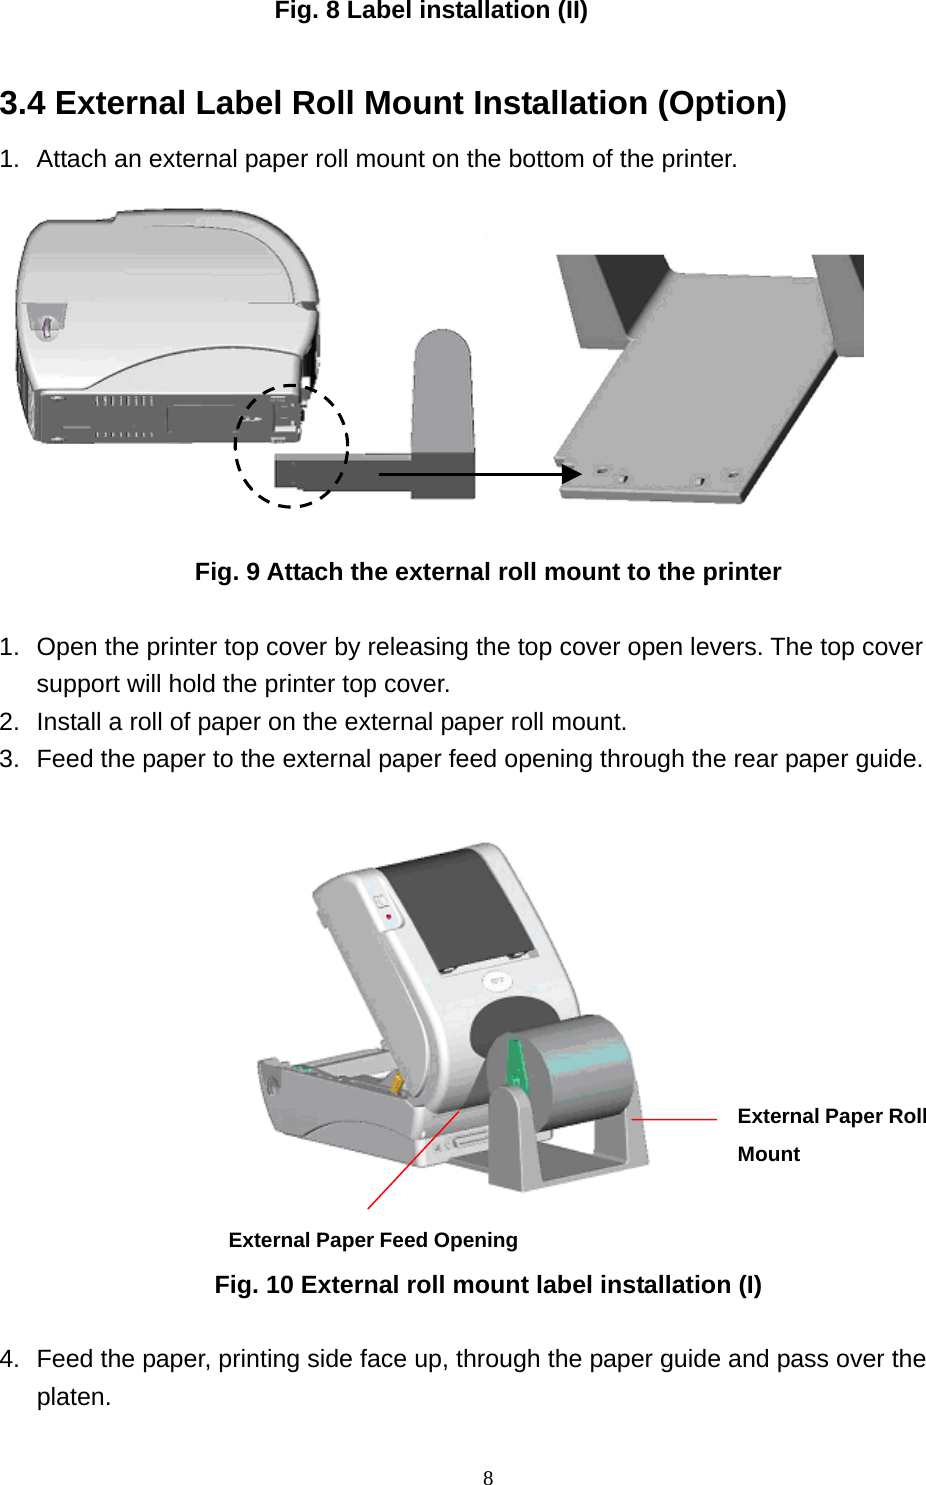  8Fig. 8 Label installation (II)  3.4 External Label Roll Mount Installation (Option) 1.  Attach an external paper roll mount on the bottom of the printer.   Fig. 9 Attach the external roll mount to the printer  1.  Open the printer top cover by releasing the top cover open levers. The top cover support will hold the printer top cover. 2.  Install a roll of paper on the external paper roll mount. 3.  Feed the paper to the external paper feed opening through the rear paper guide.                      Fig. 10 External roll mount label installation (I)  4.  Feed the paper, printing side face up, through the paper guide and pass over the platen. External Paper Feed OpeningExternal Paper RollMount 